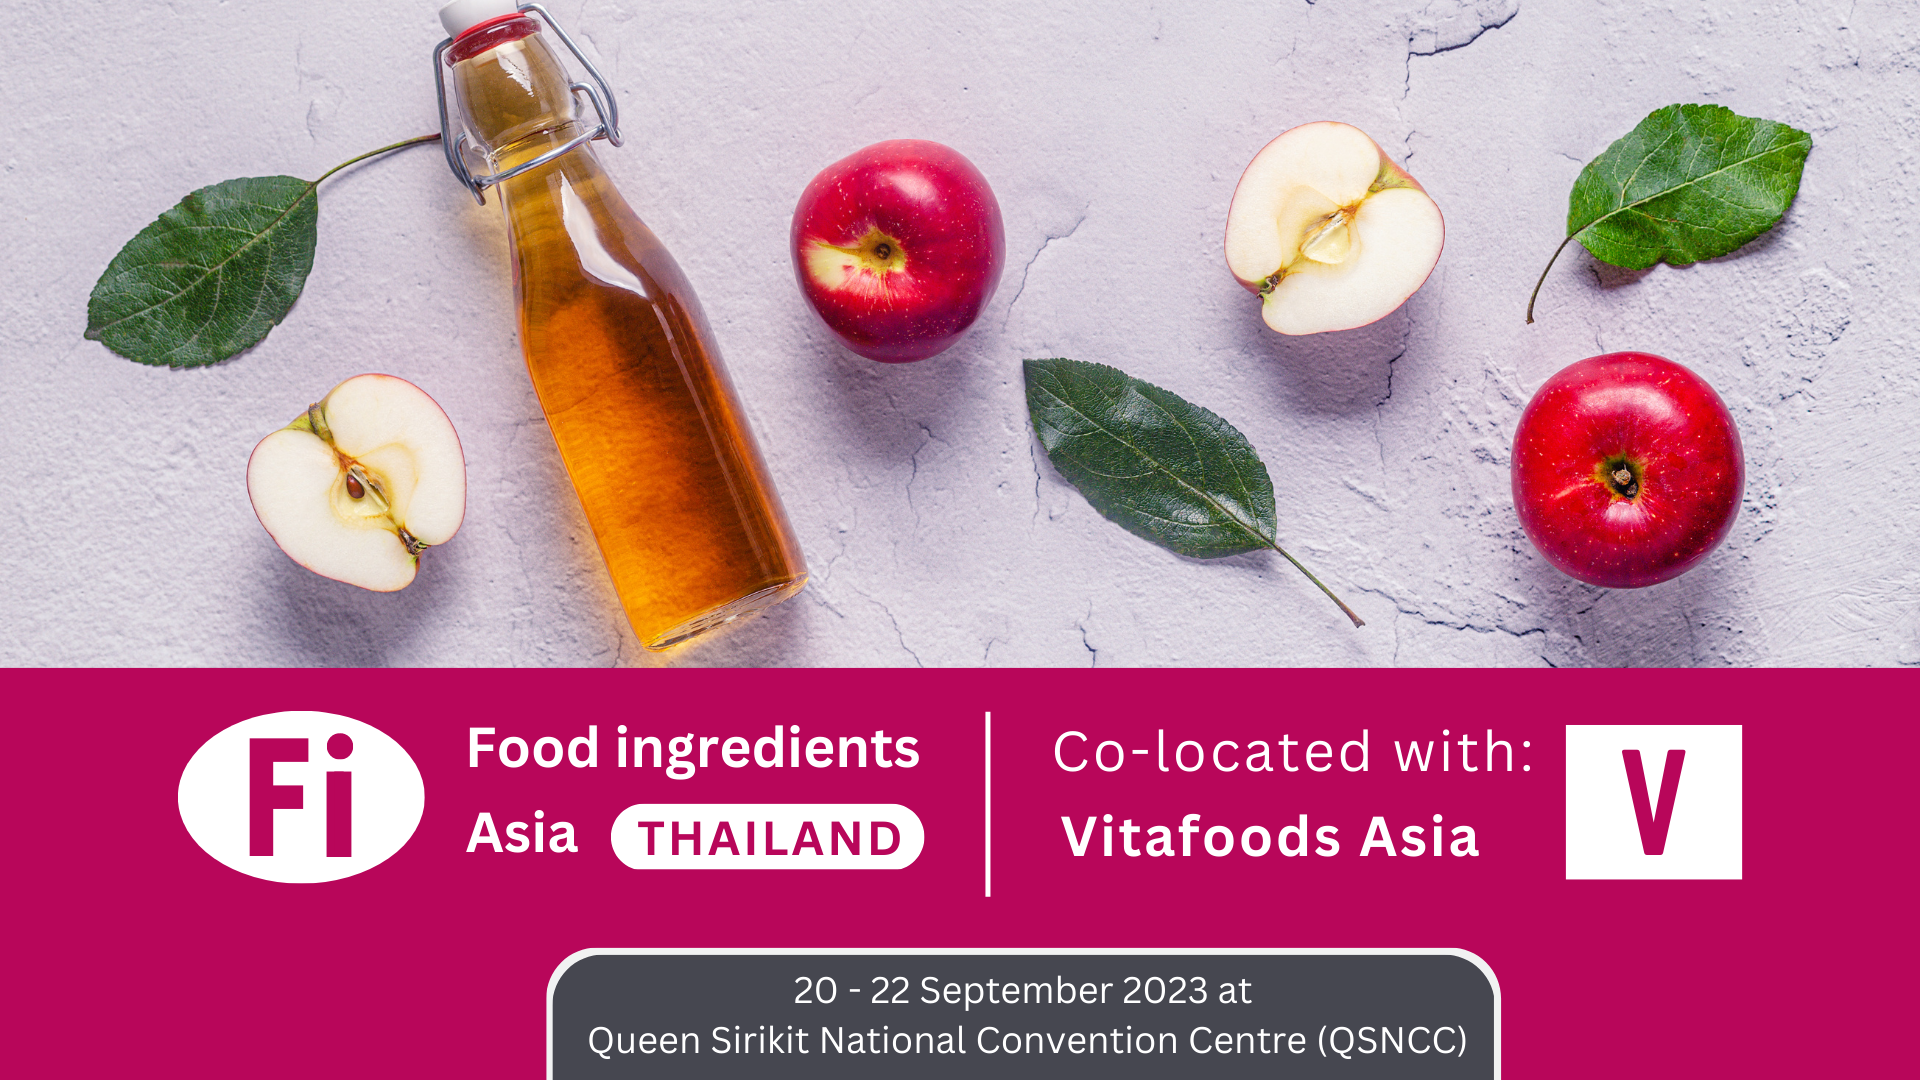 Food ingredients Asia co-located with Vitafoods Asia Bangkok 2023